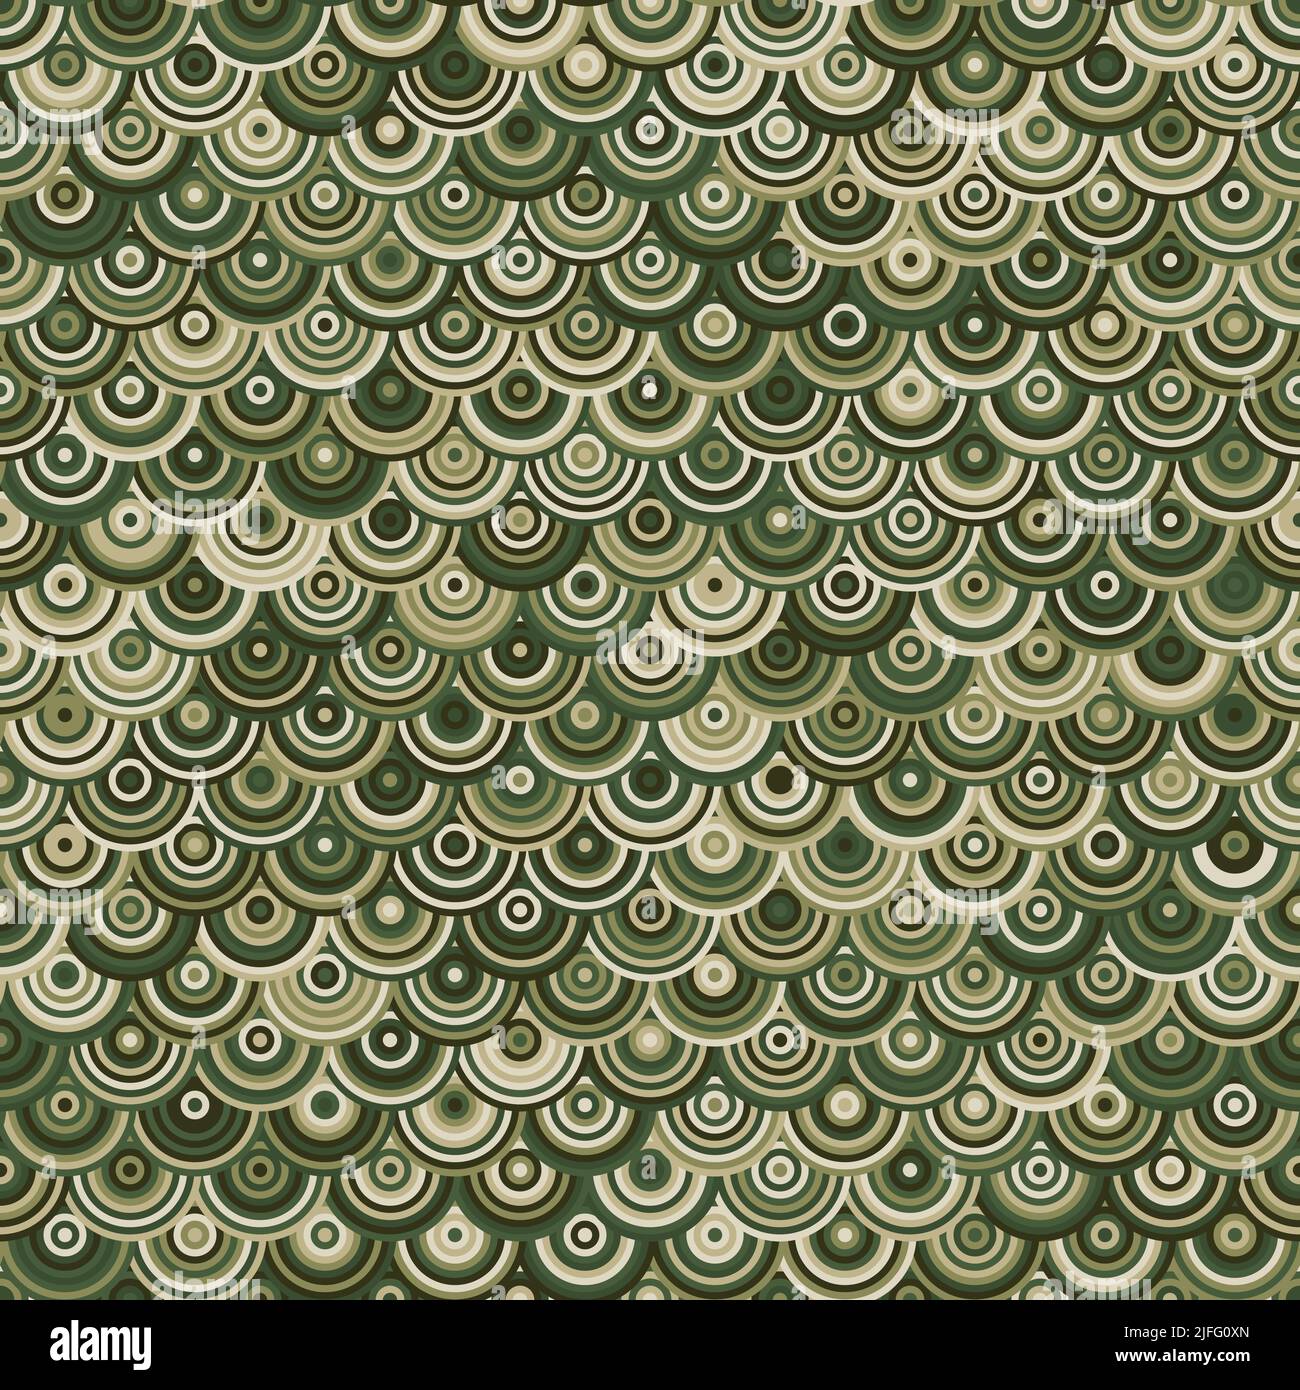 Vector olive and tan repeating texture print of snake skin seamless pattern Stock Vector